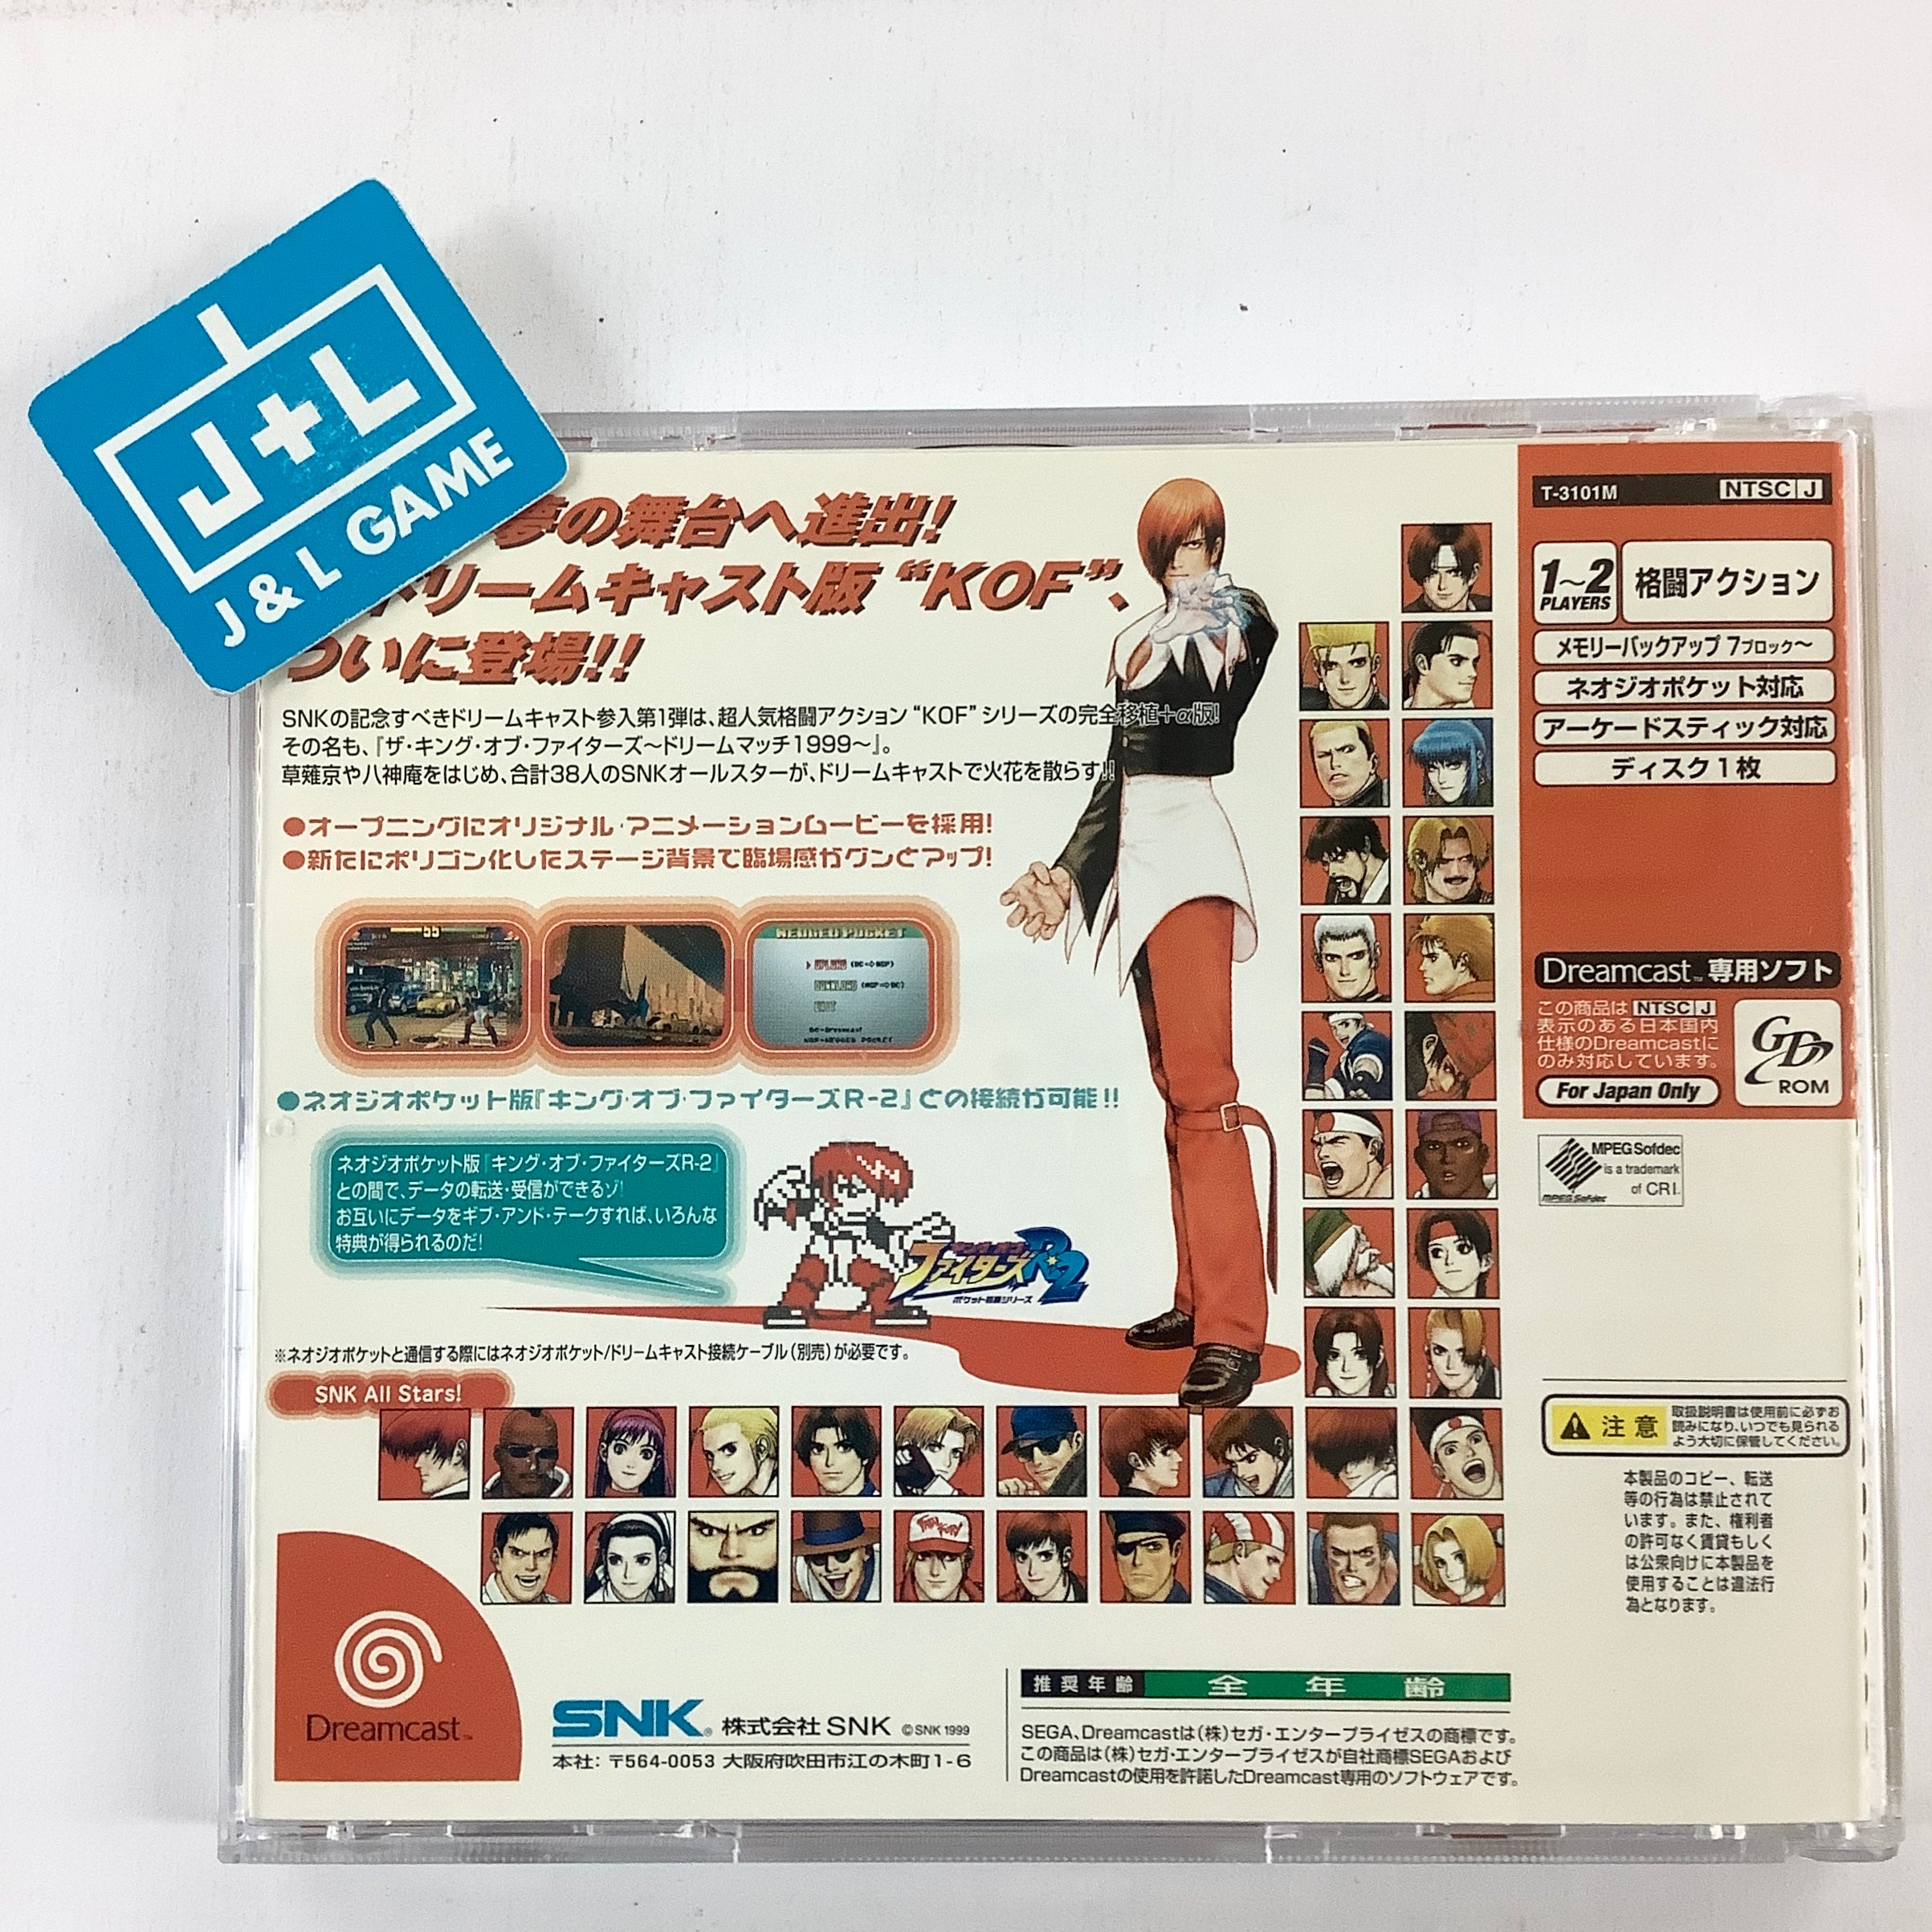 The King of Fighters Dream Match 1999 - (DC) SEGA Dreamcast [Pre-Owned] (Japanese Import) Video Games SNK   